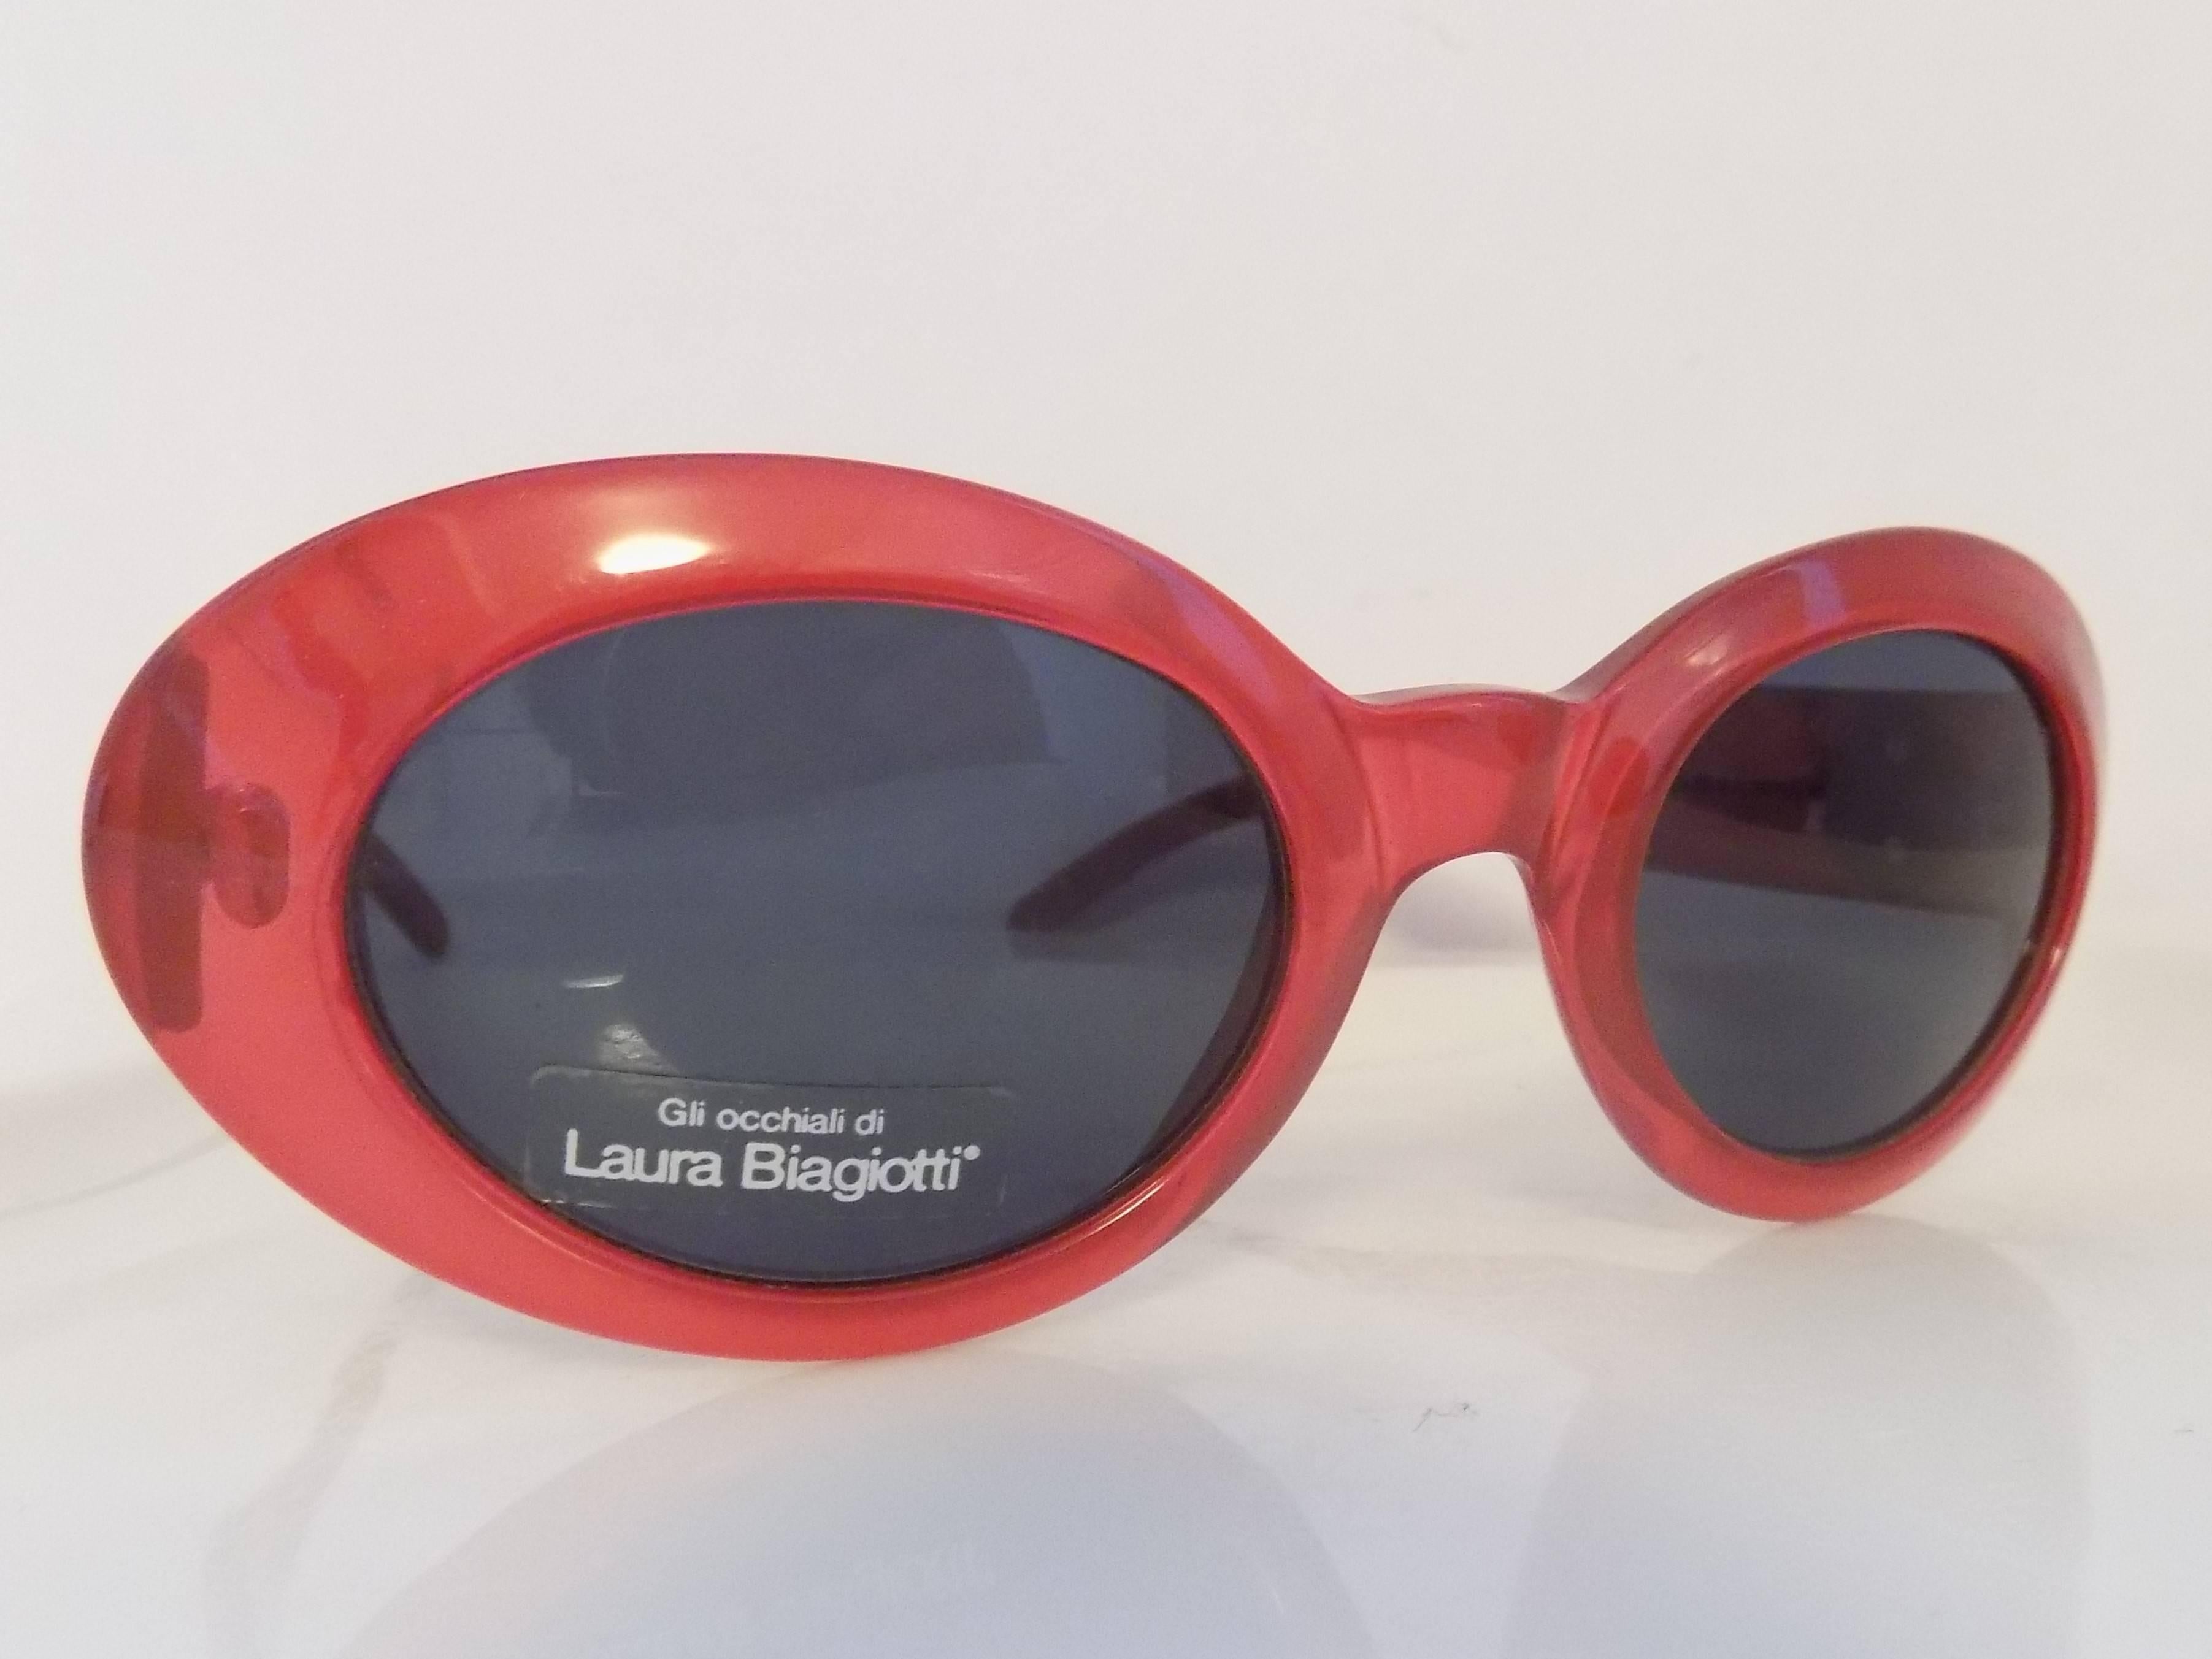 1980s Laura Biagiotti red sunglasses

Totally made in italy